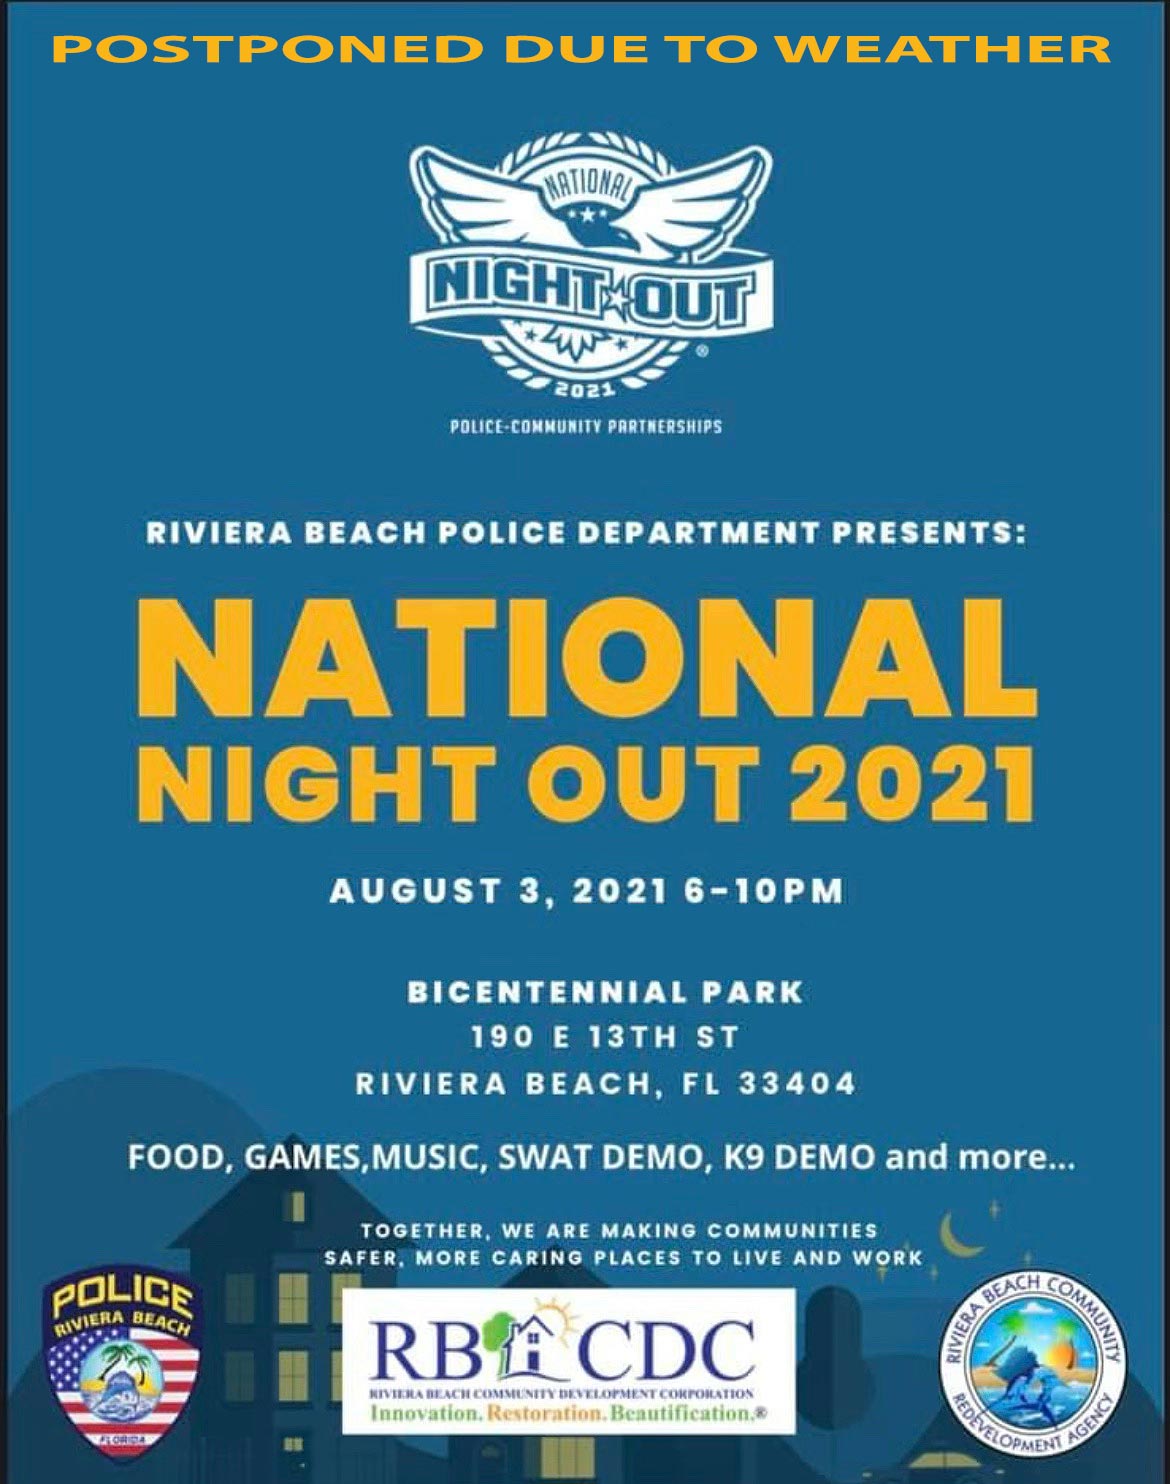 National Night out Postponed due to weather